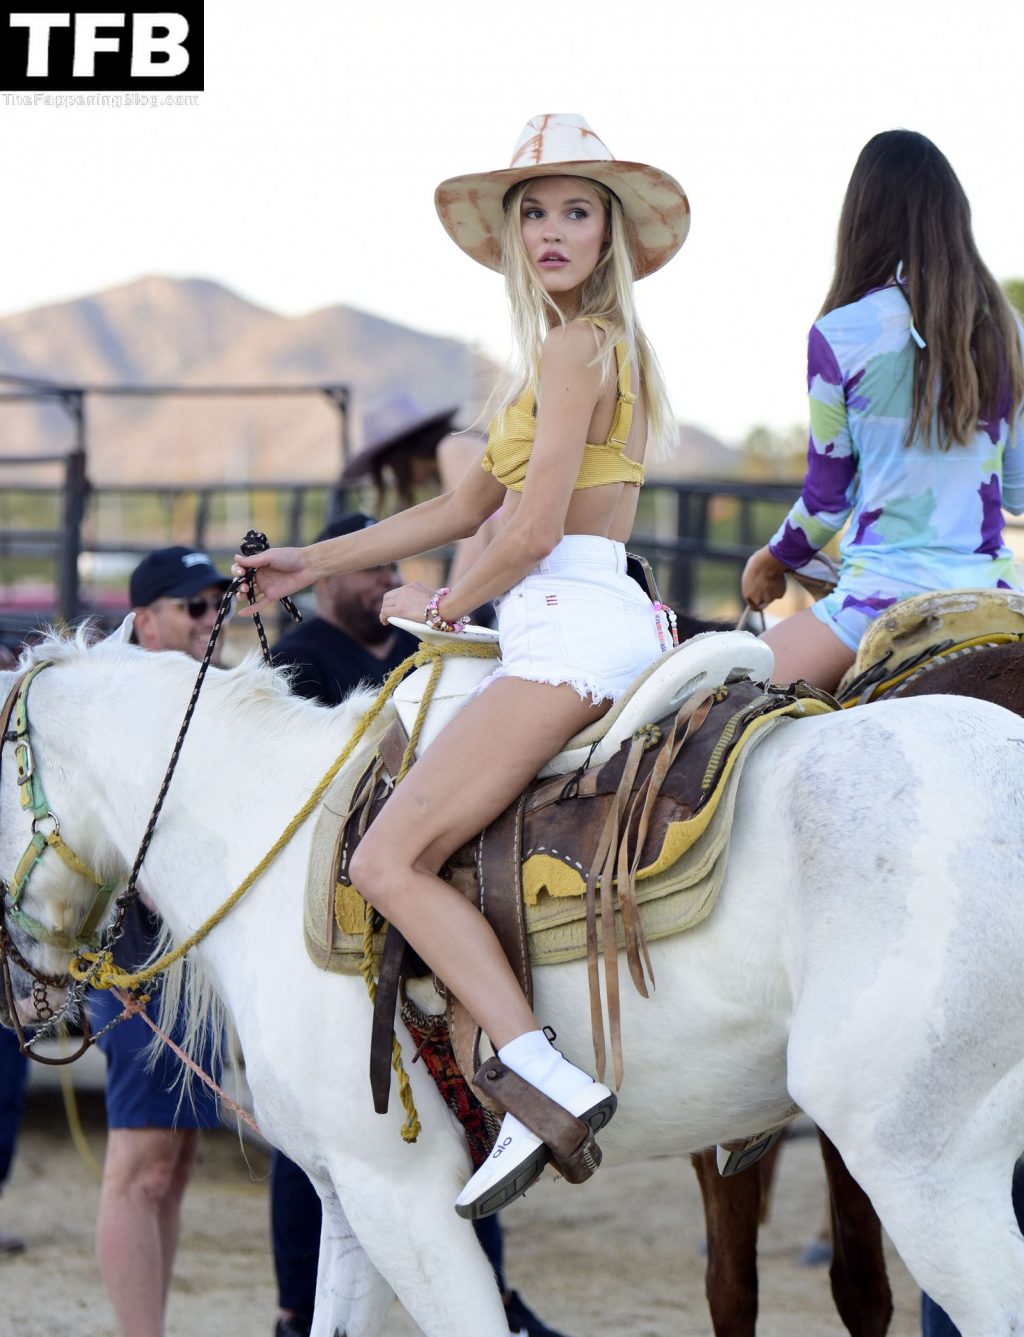 Joy Corrigan is Pictured Taking a Horseback Ride in in Cabo San Lucas (89 Photos)